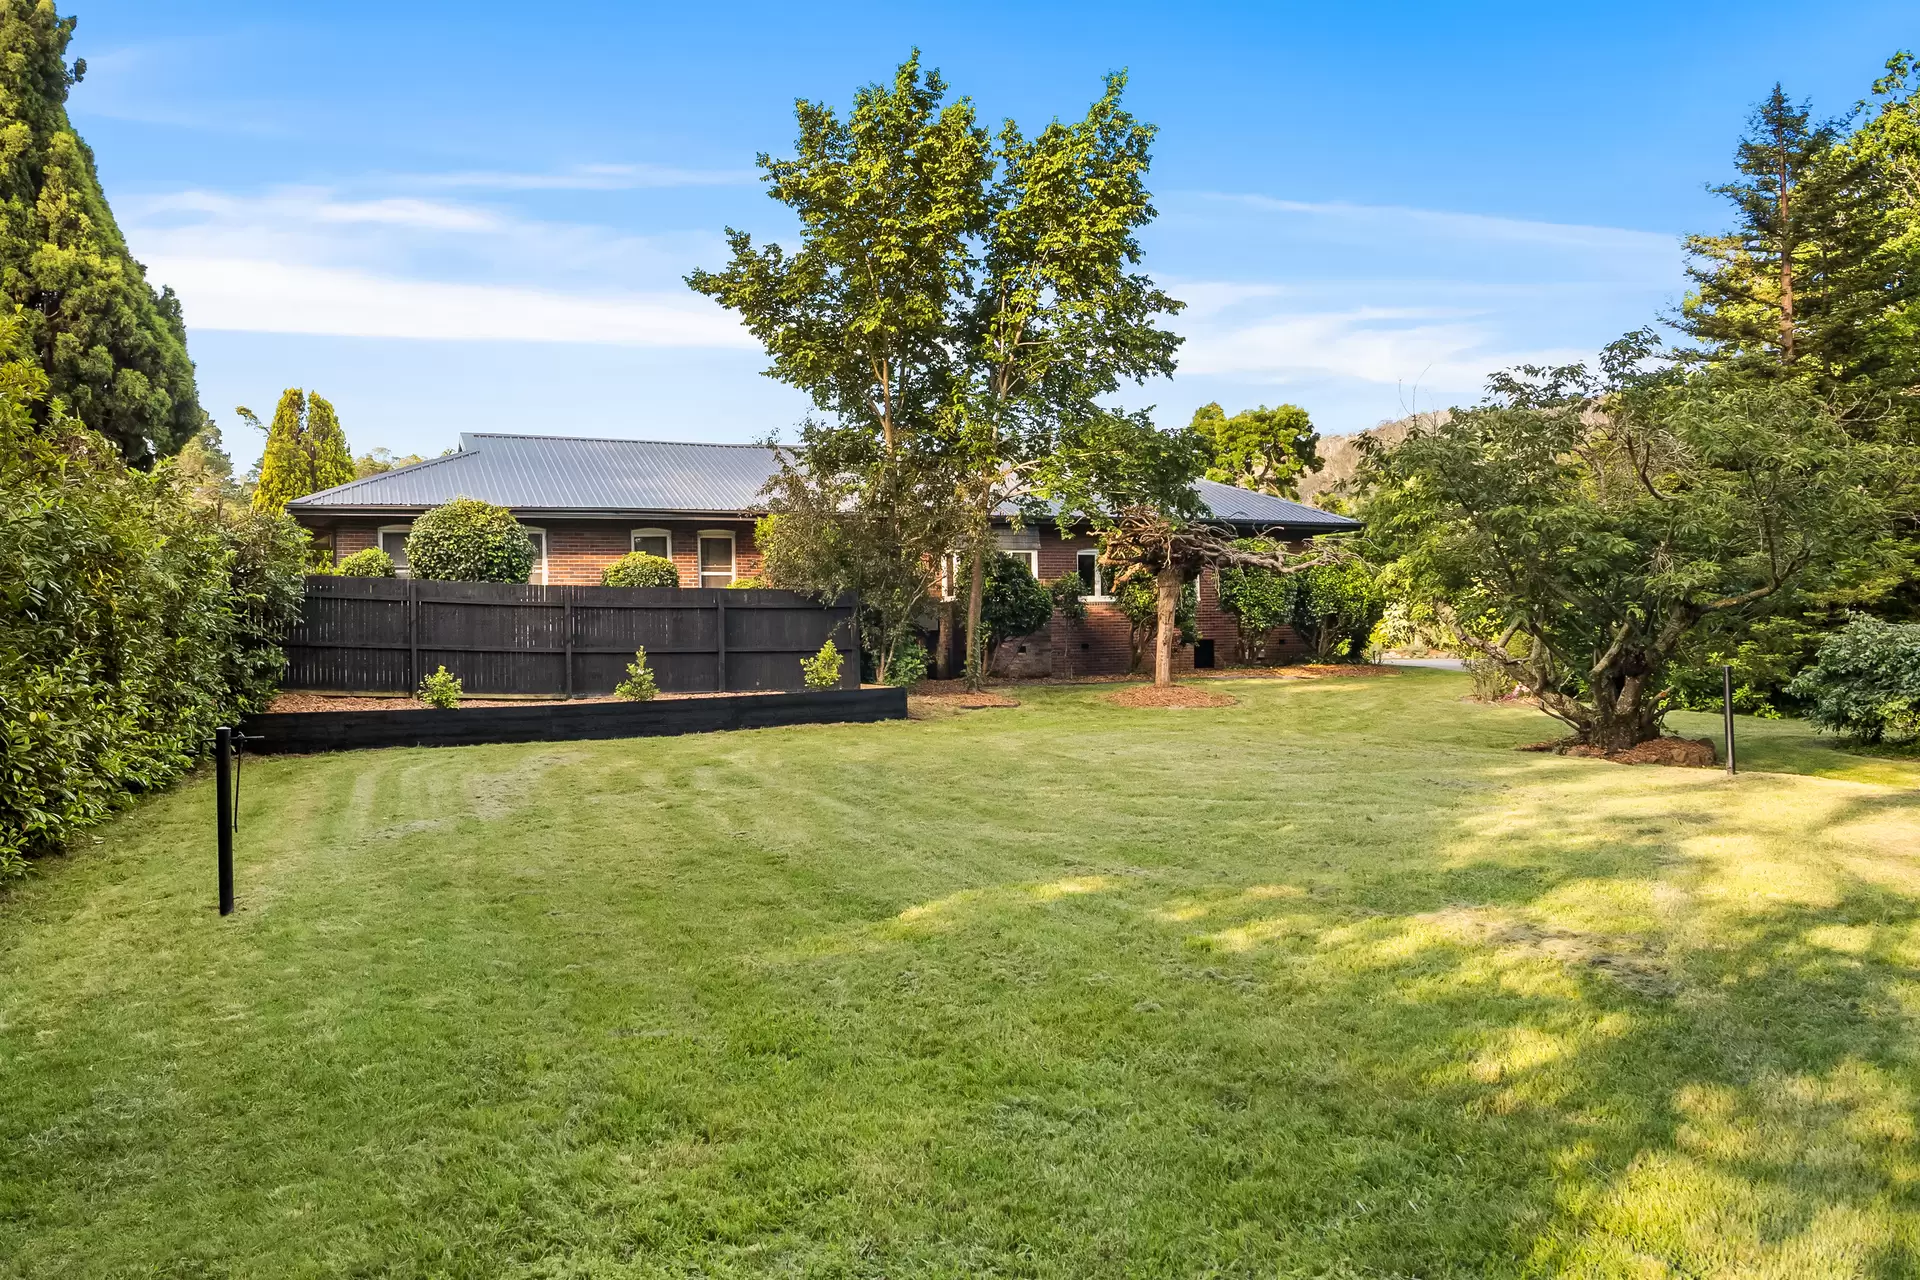 Photo #14: 13 Centennial Road, Bowral - Sold by Drew Lindsay Sotheby's International Realty